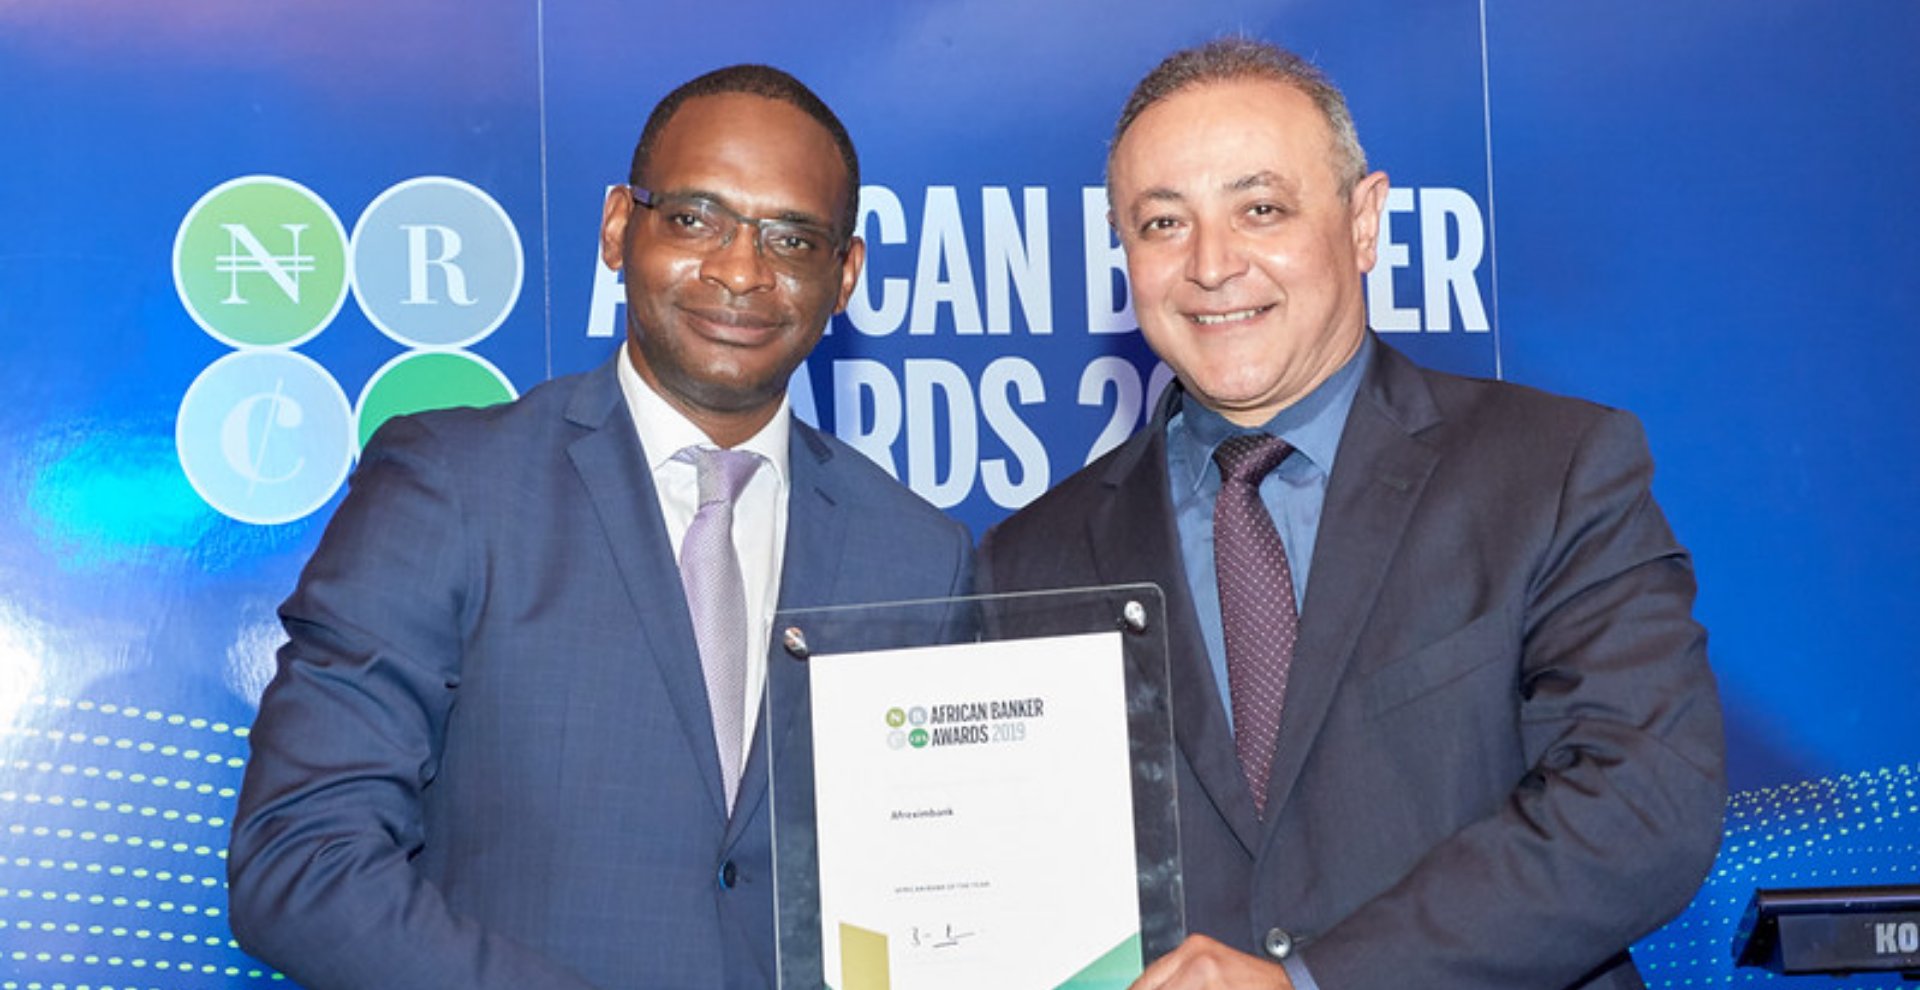 AGF PARRAINE LE AFRICAN BANKER AWARDS